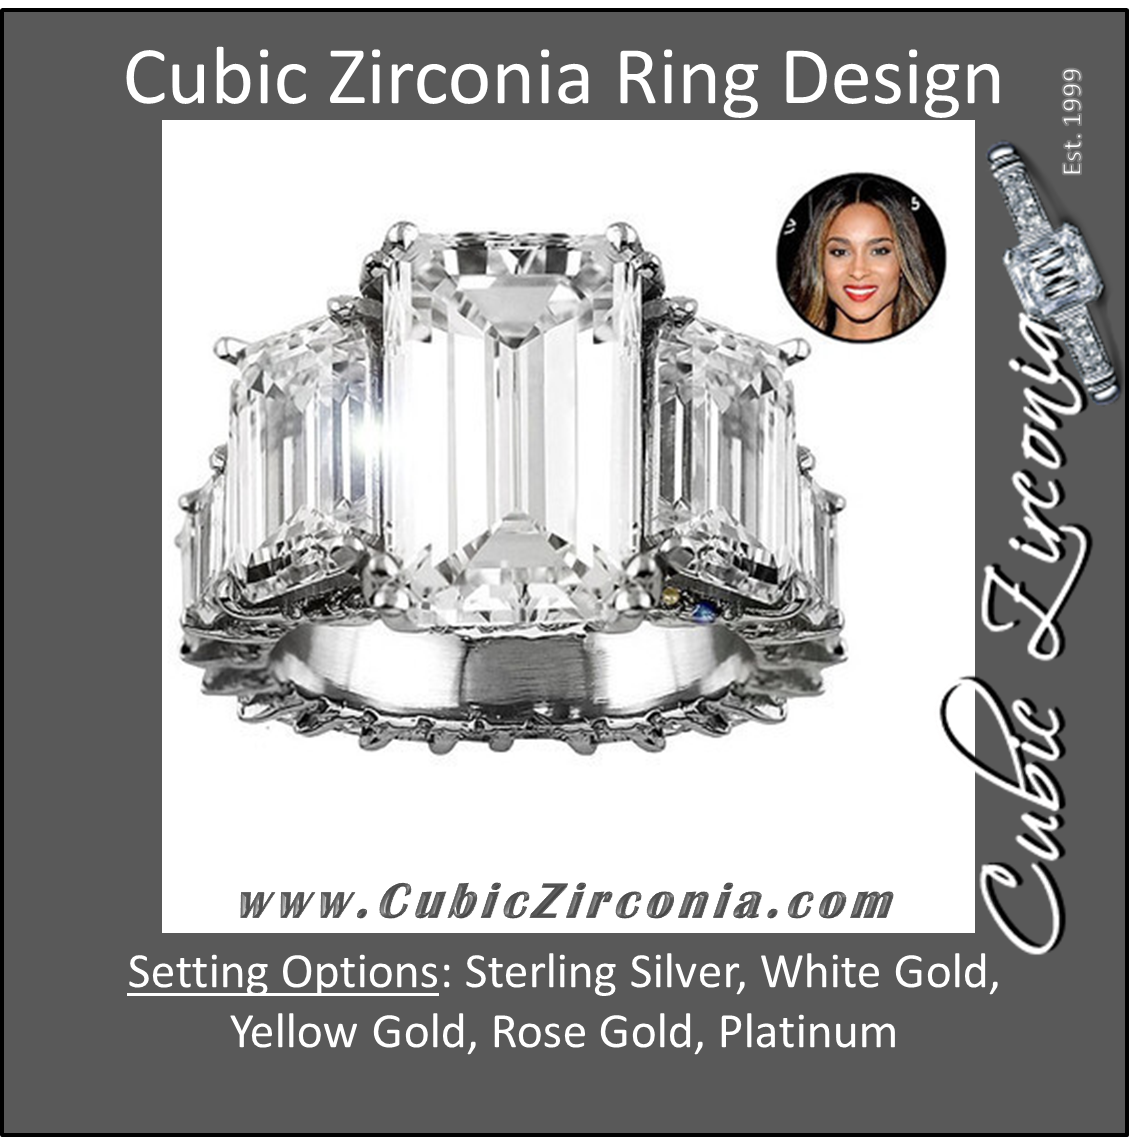 Cubic Zirconia Engagement Ring- 10.75 TCW Celebrity Replica Ciara's Ring